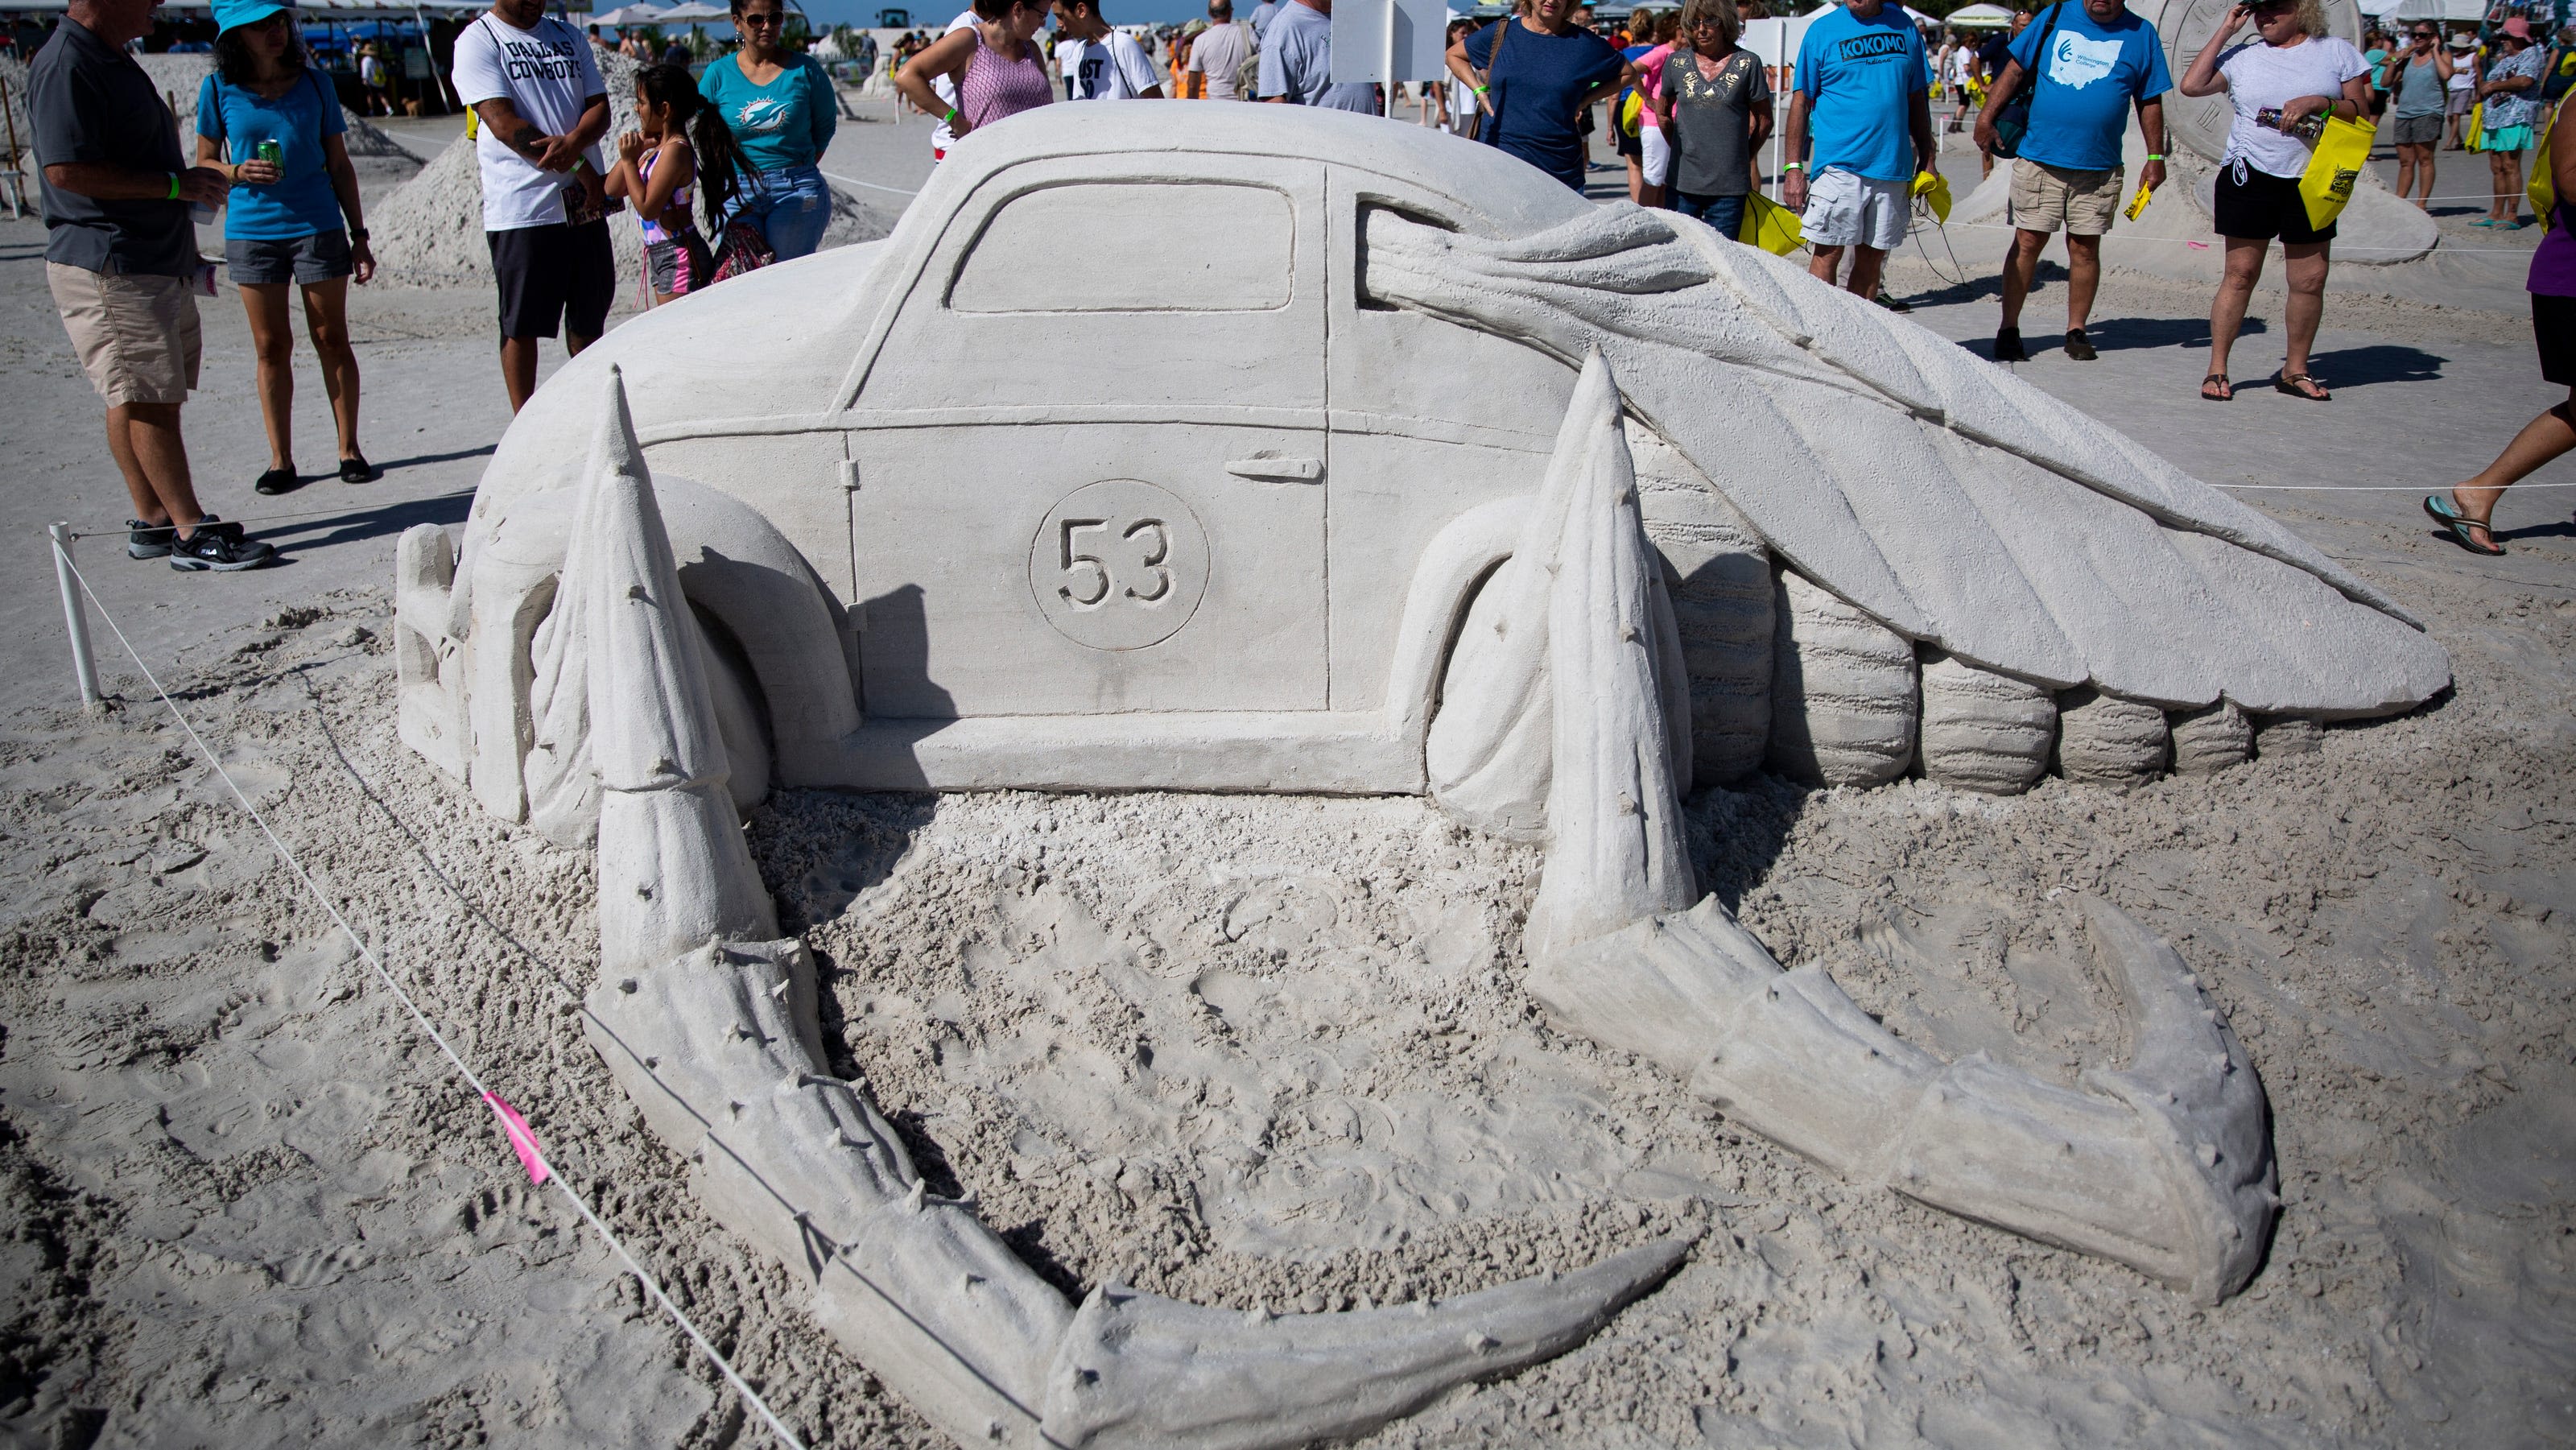 Sand sculpting on Fort Myers Beach is coming back. Here are video highlights from the past